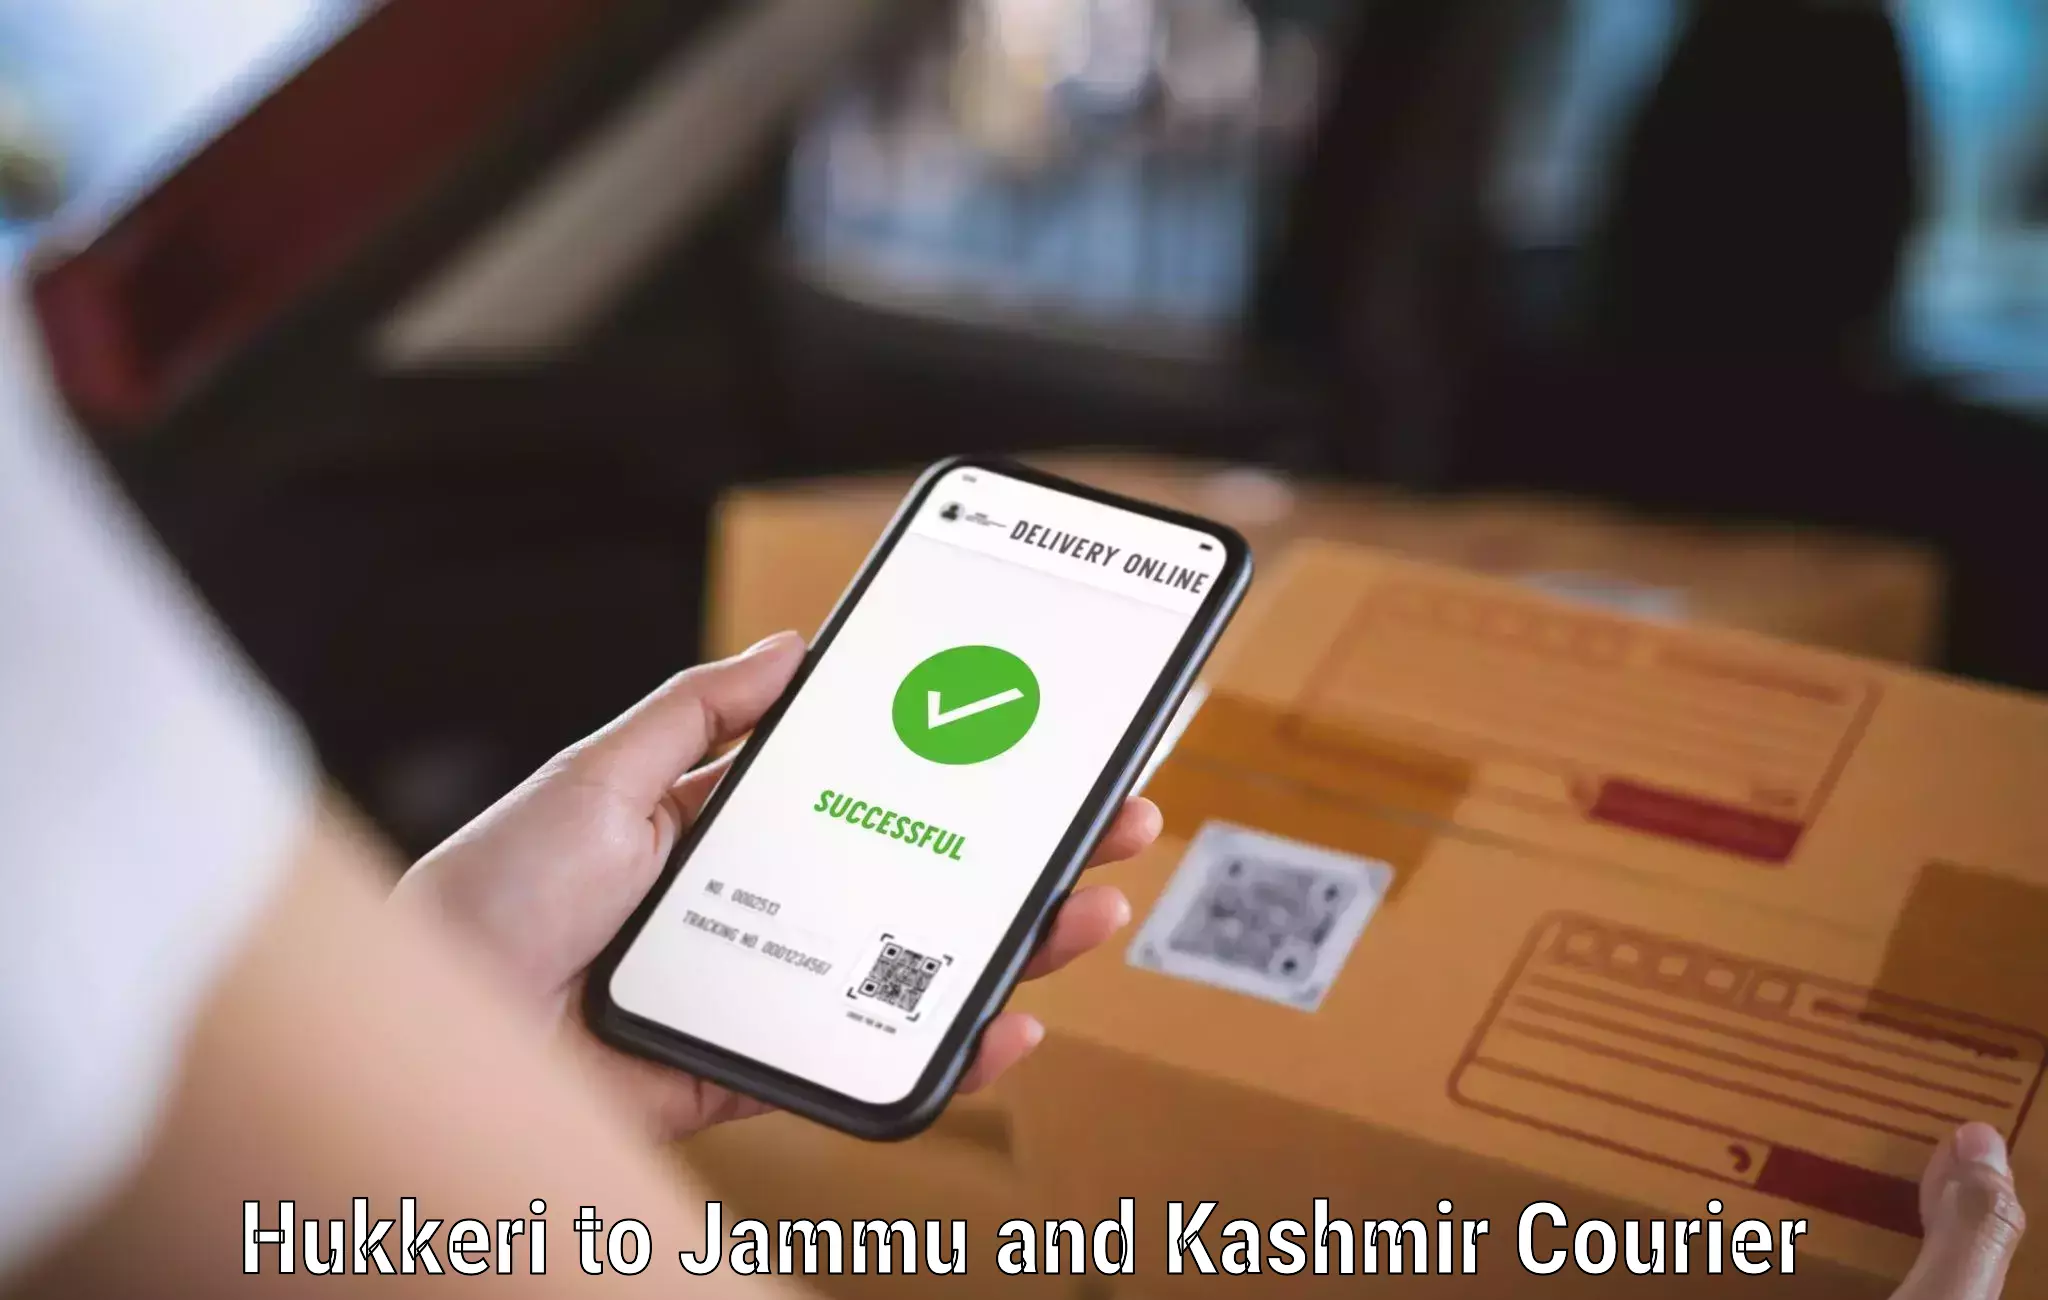 On-call courier service Hukkeri to Jammu and Kashmir